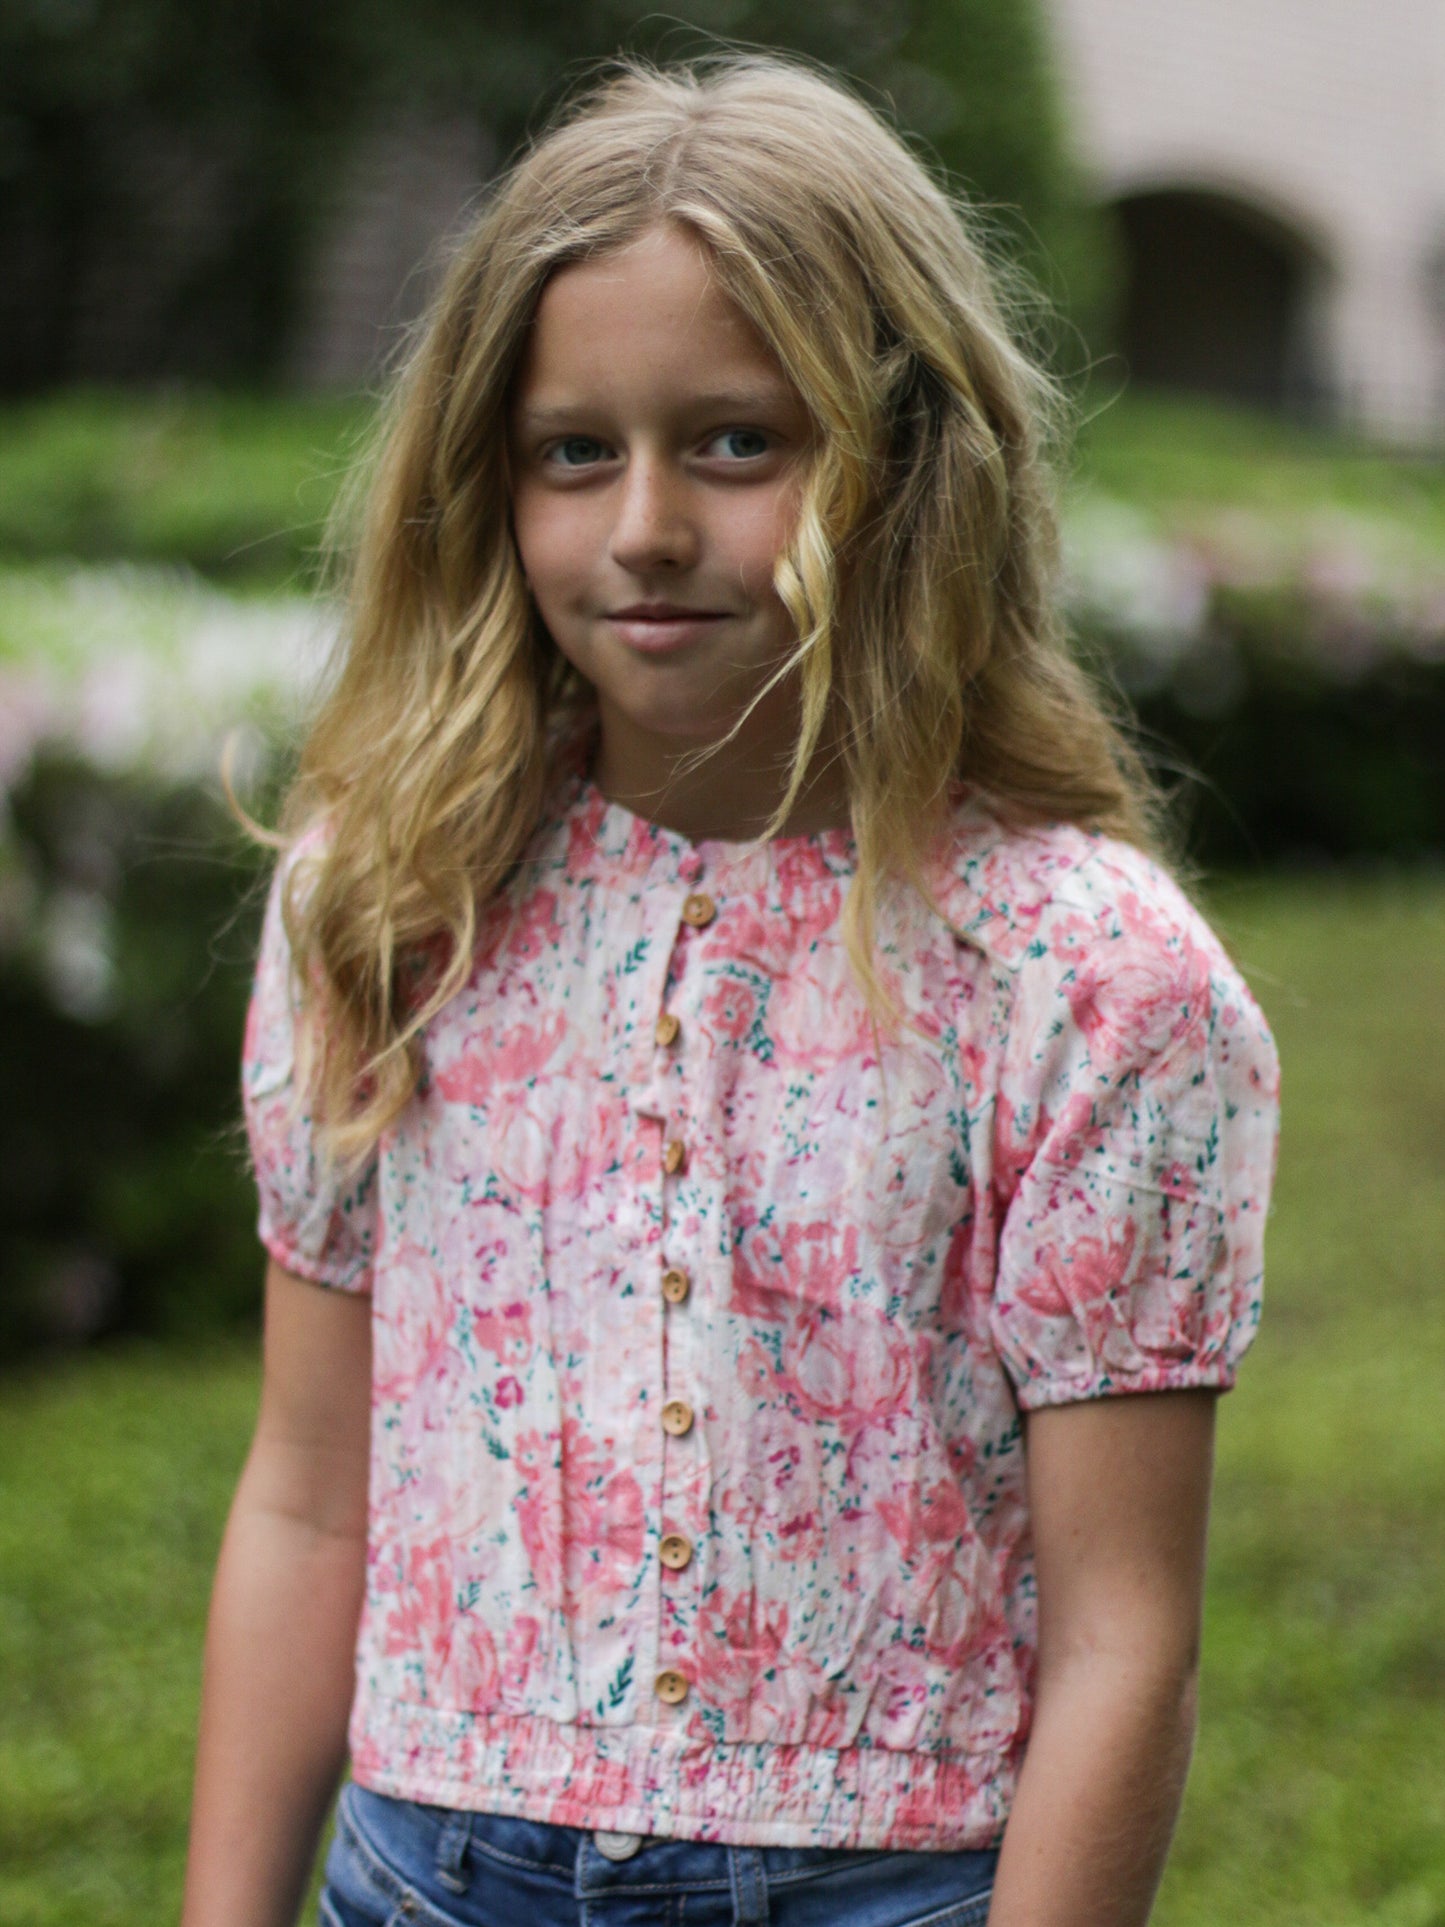 This image of a girl features the product Classic Button Top - Starburst Pink. This top has functional buttons down the bodice, puff sleeves, and elastic ruffle neckline. It is a vibrant pattern of large bursting pink blooms and small green leaves.